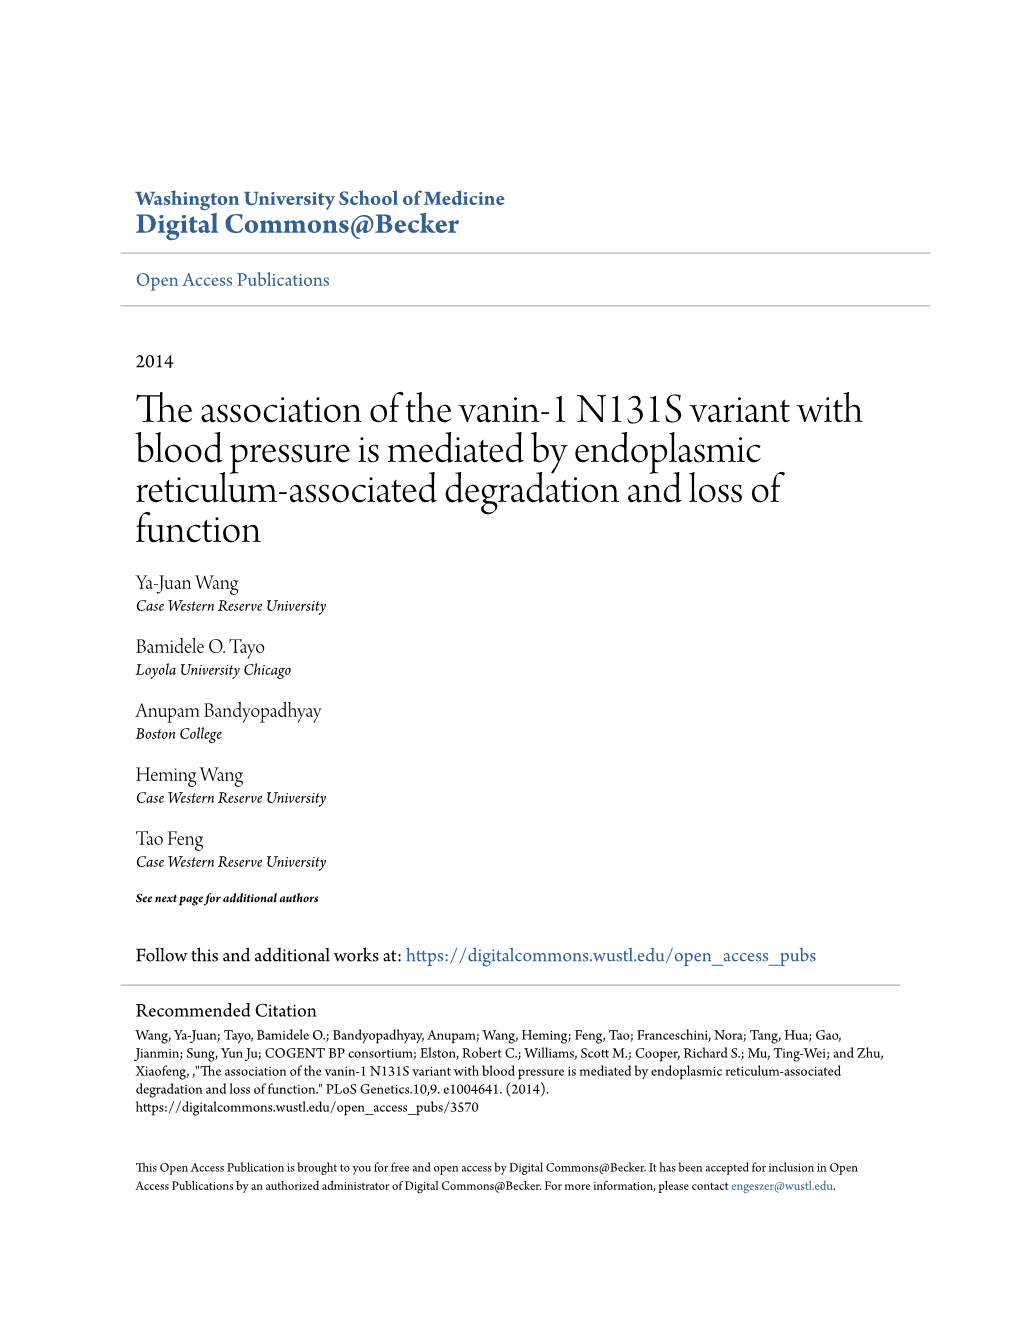 The Association of the Vanin-1 N131S Variant with Blood Pressure Is Mediated by Endoplasmic Reticulum-Associated Degradation and Loss of Function." Plos Genetics.10,9